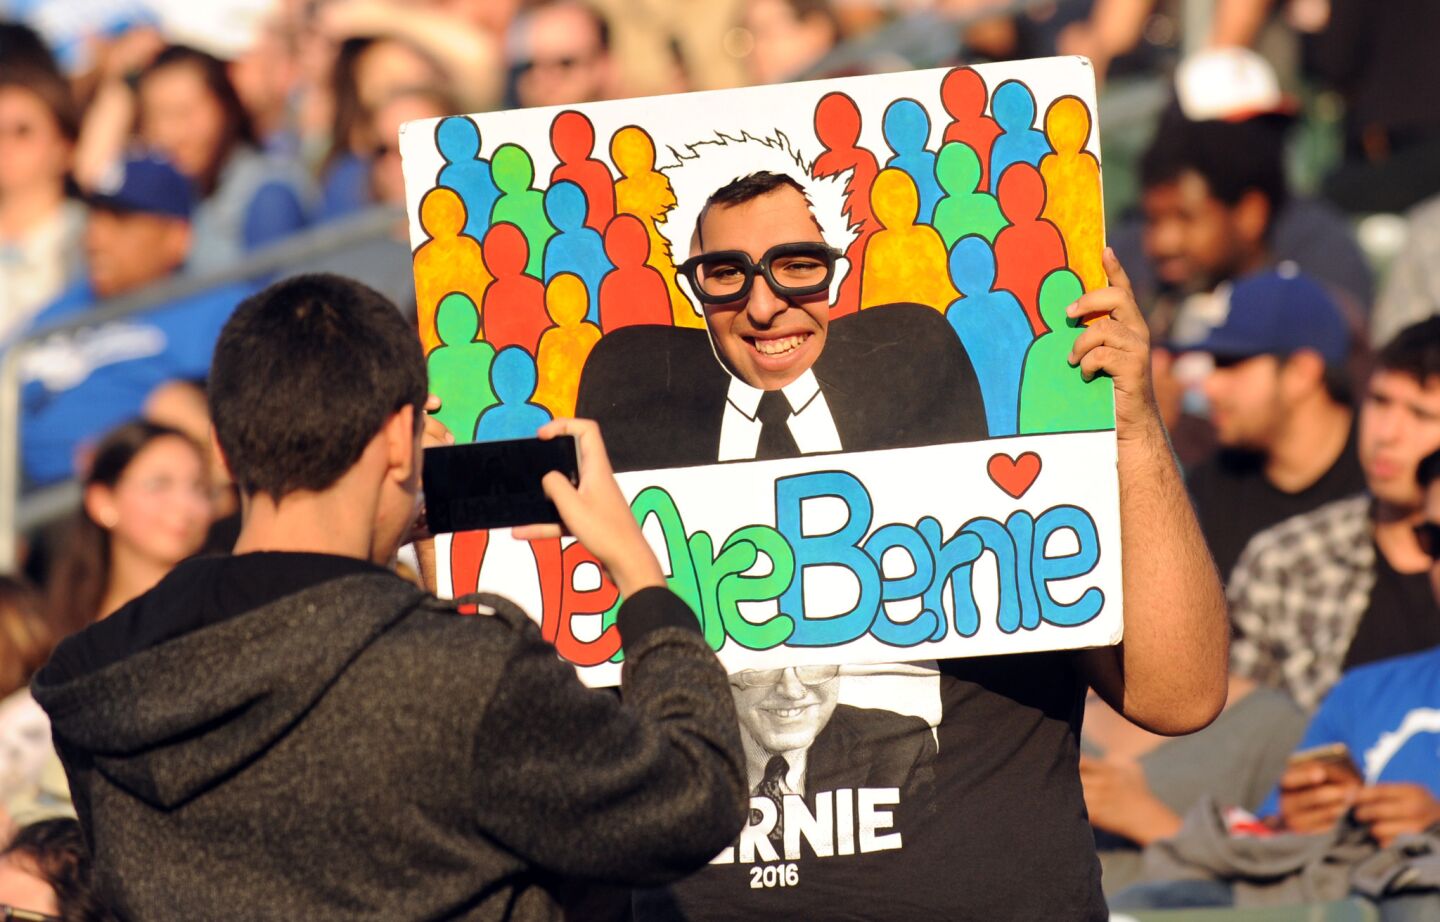 Supporters take their turns being Bernie for photos before the Sanders rally in Carson.